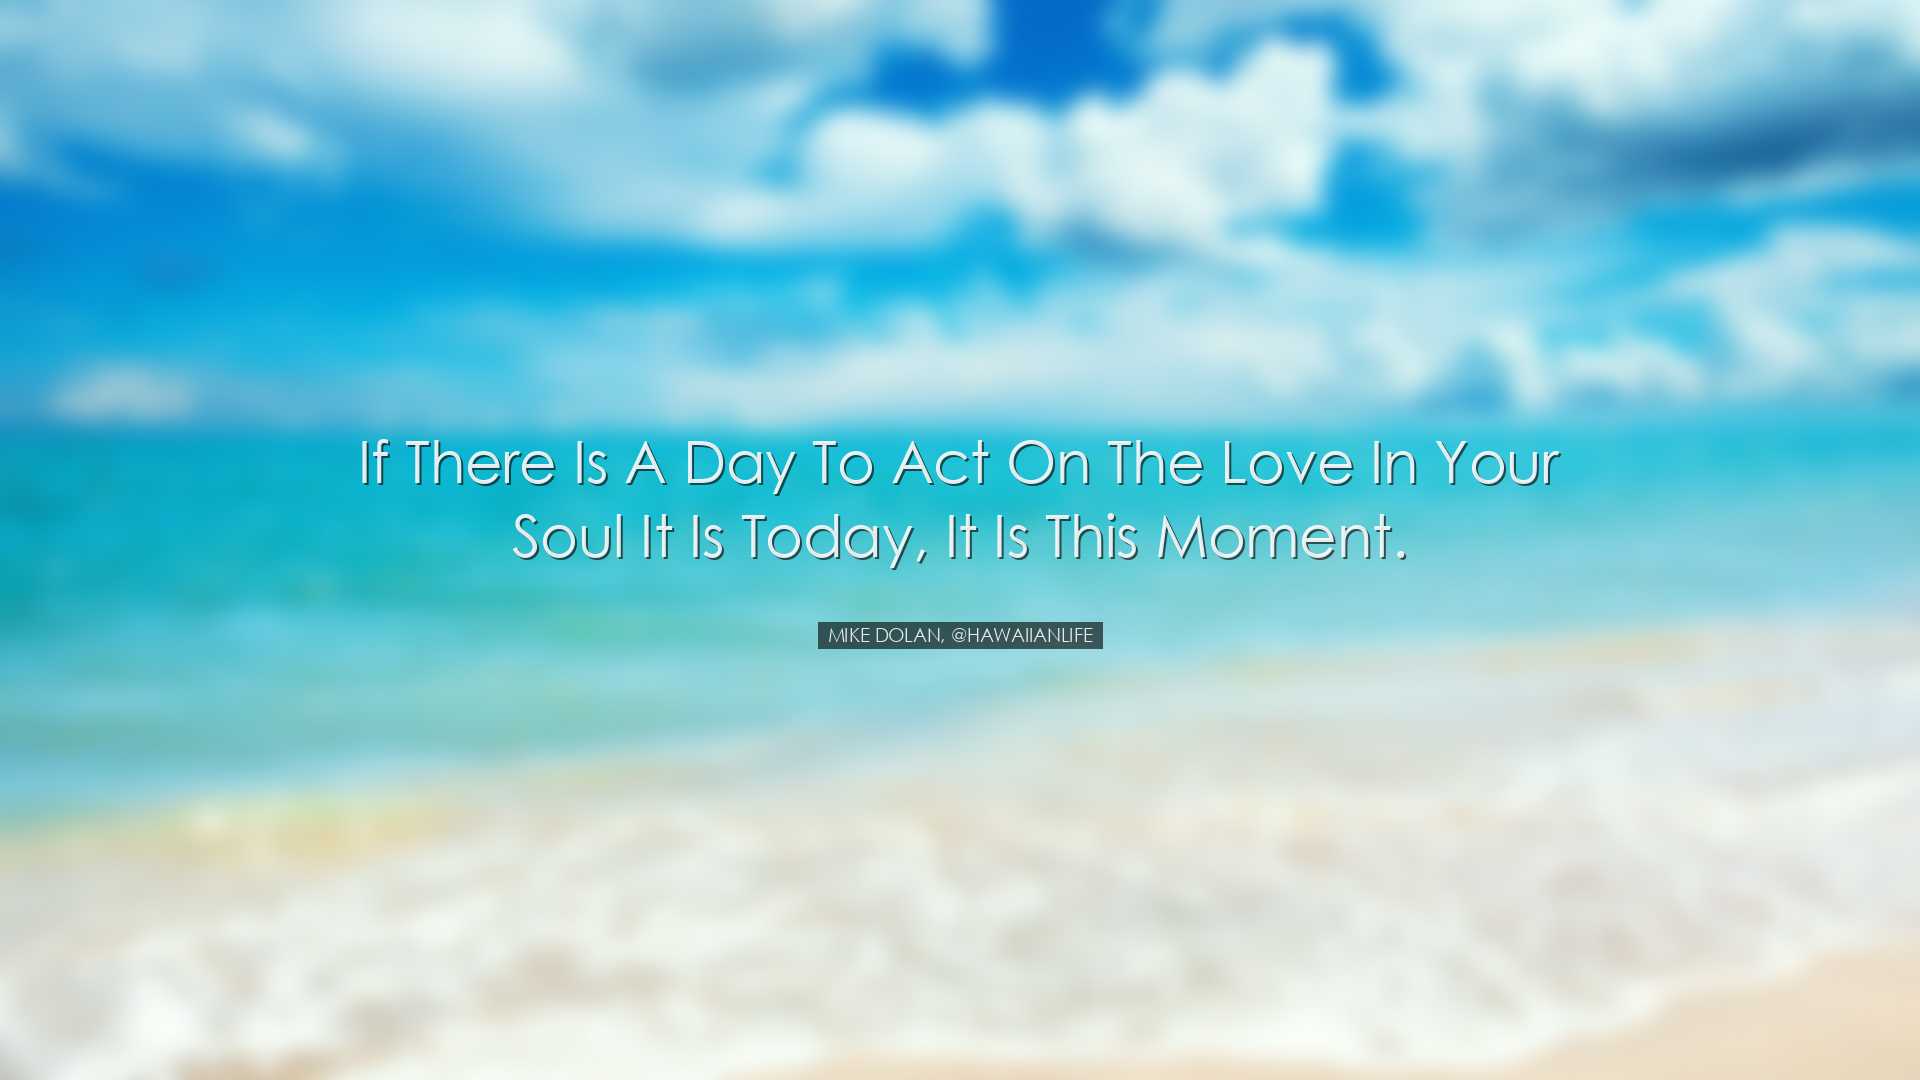 If there is a day to act on the Love in your soul it is today, it